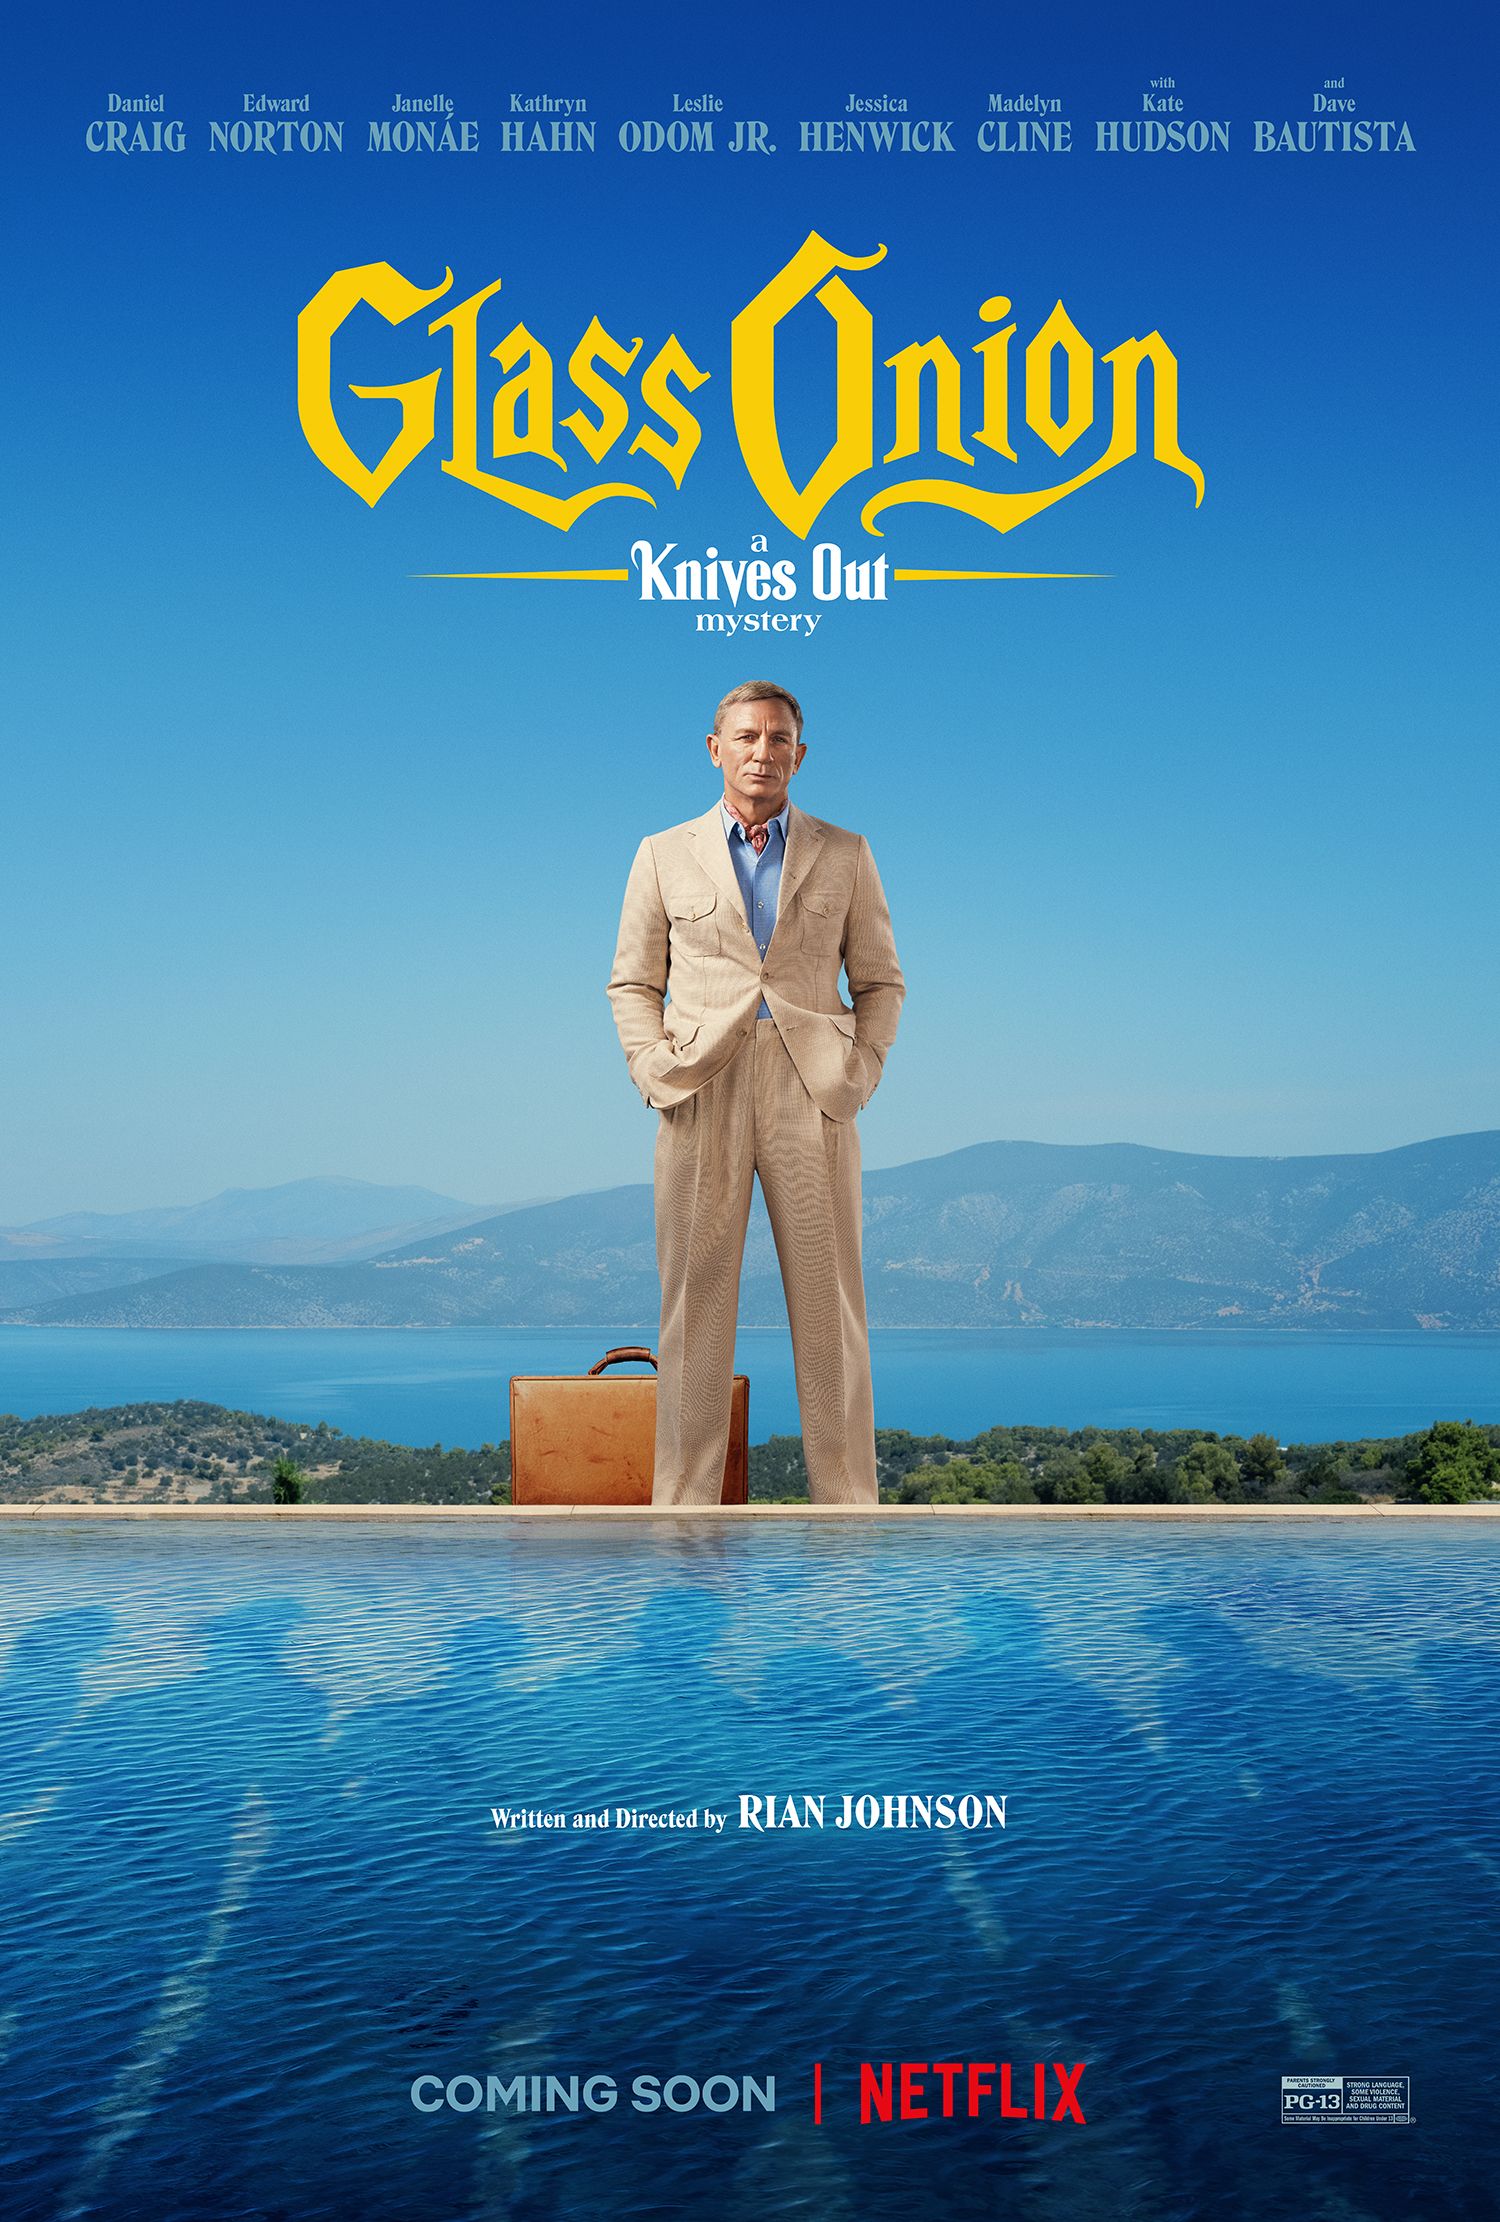 Glass Onion Knives Out 2 Poster